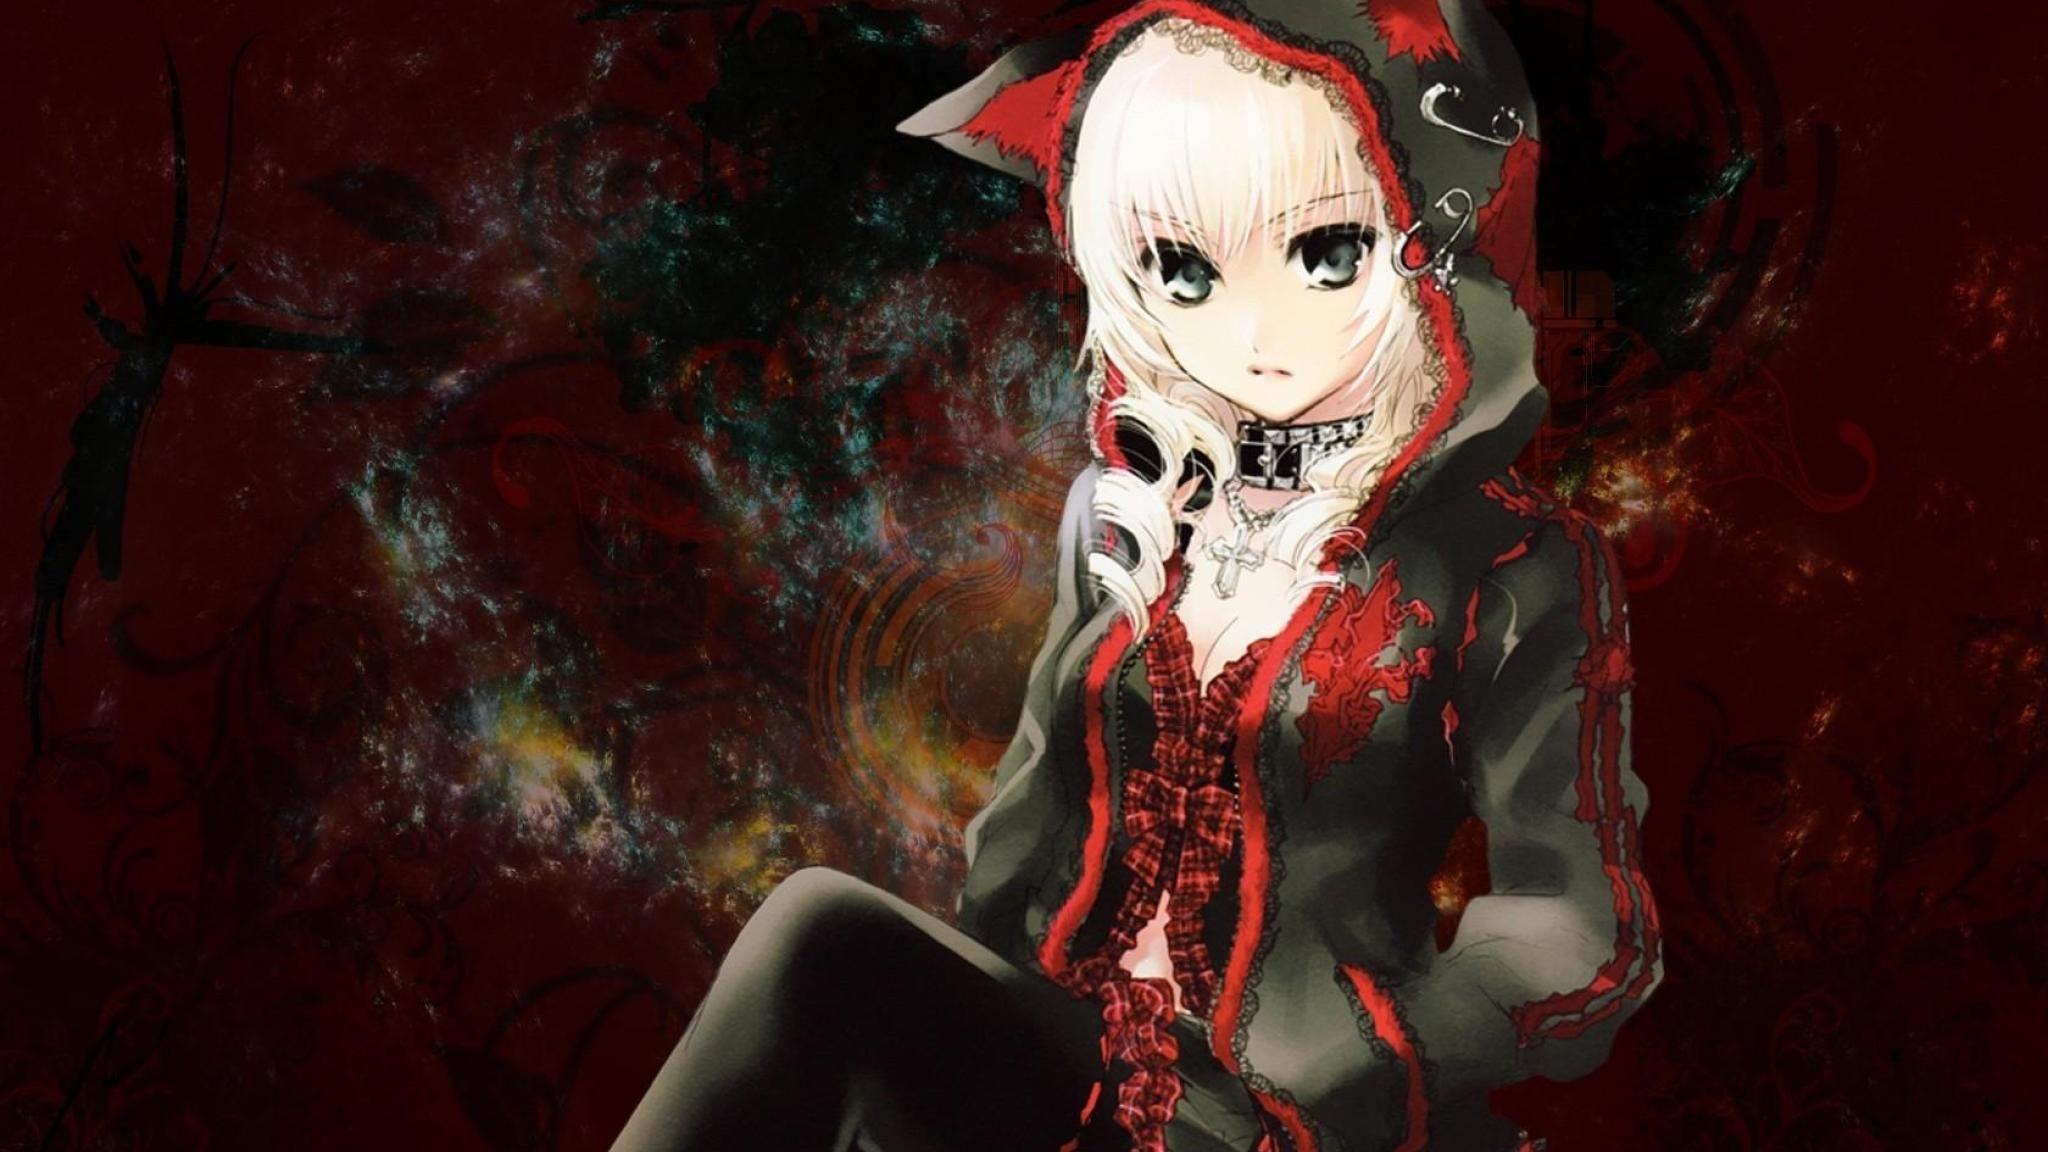 10 Scary Anime Girls That Will Make You Creepy2023